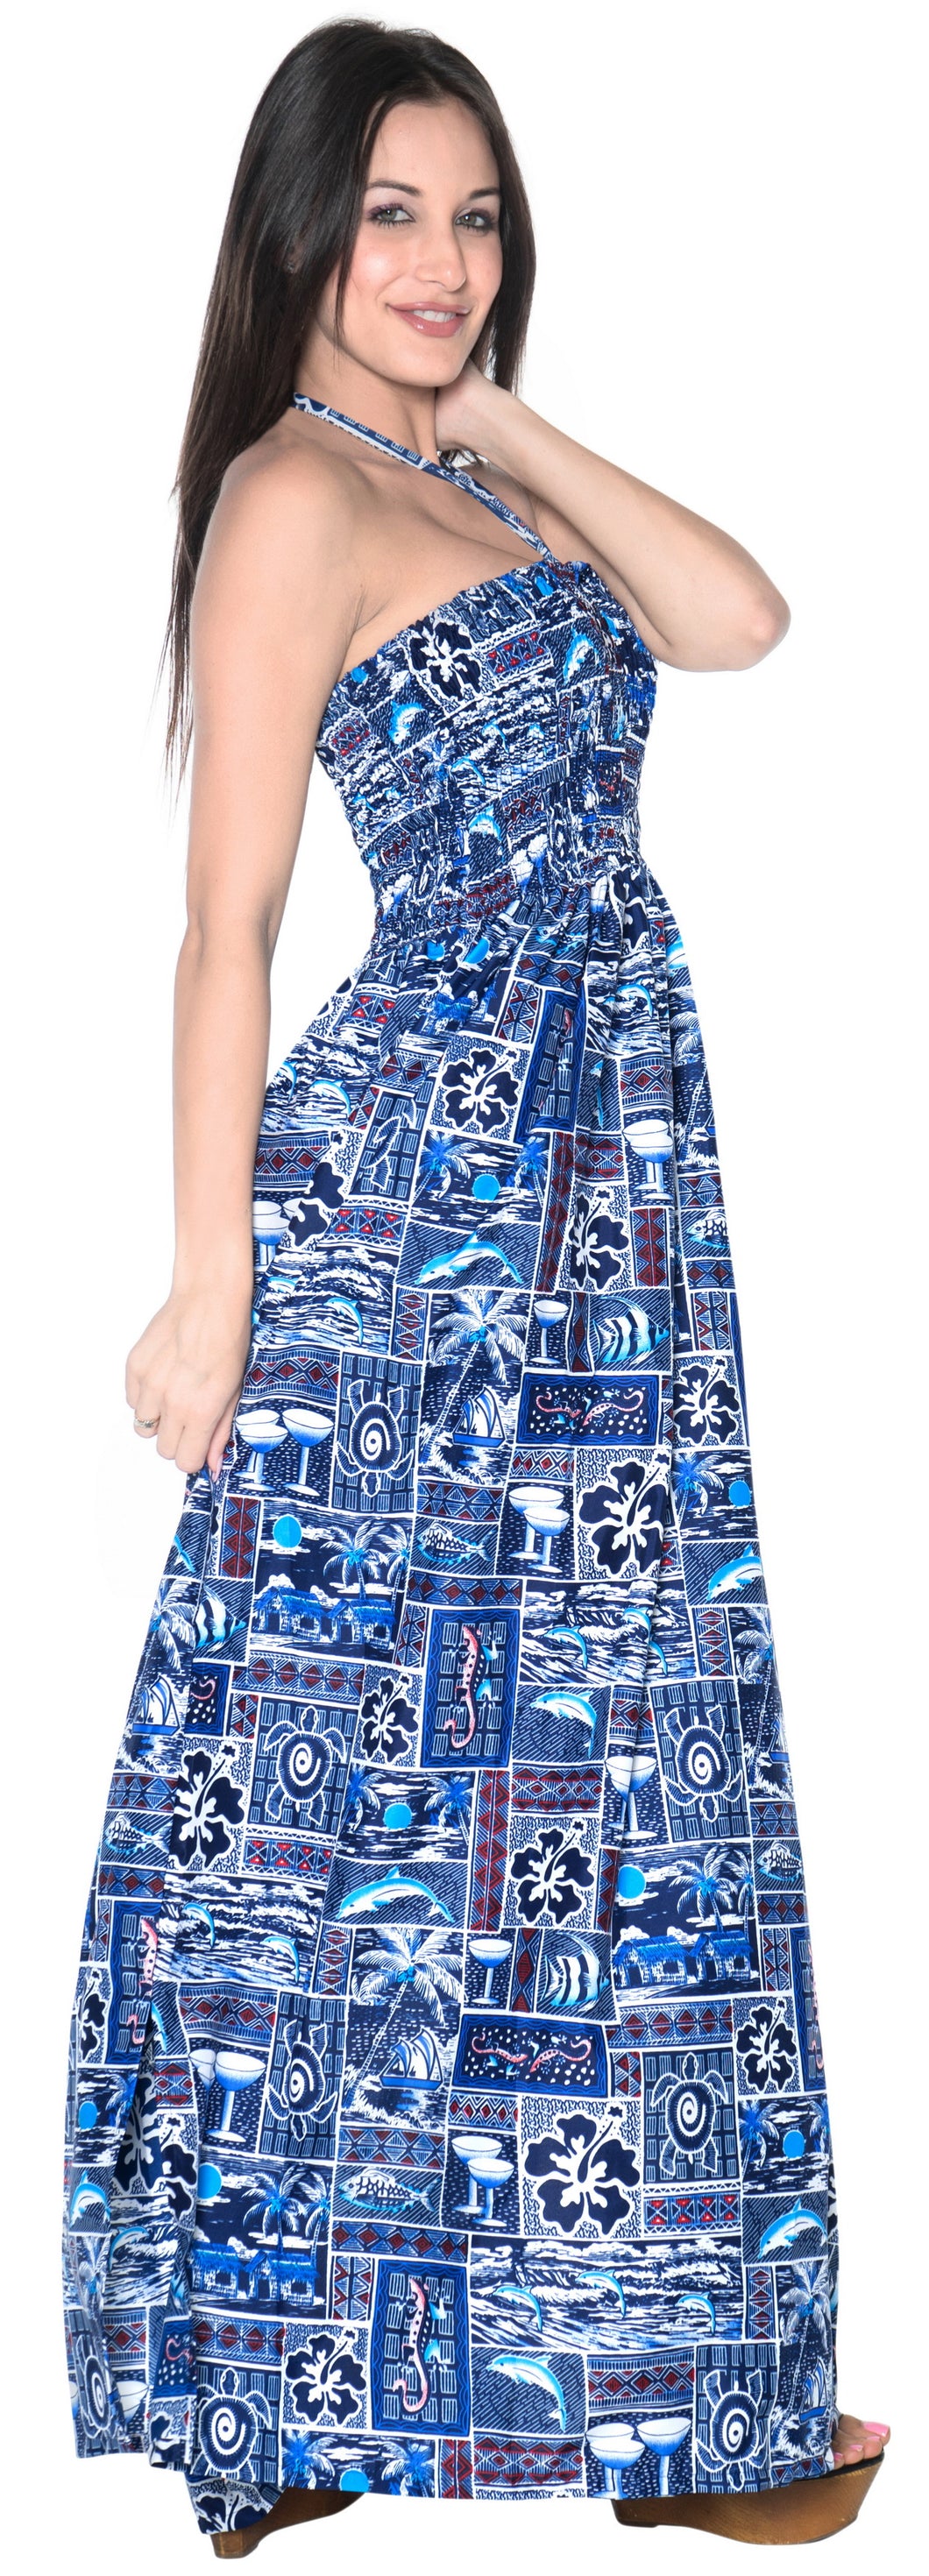 LA LEELA Long Maxi Hawaiian Halter Neck Tube Dress For Women With Sea Creatures And Floral Print All Over Everyday Casual Wear